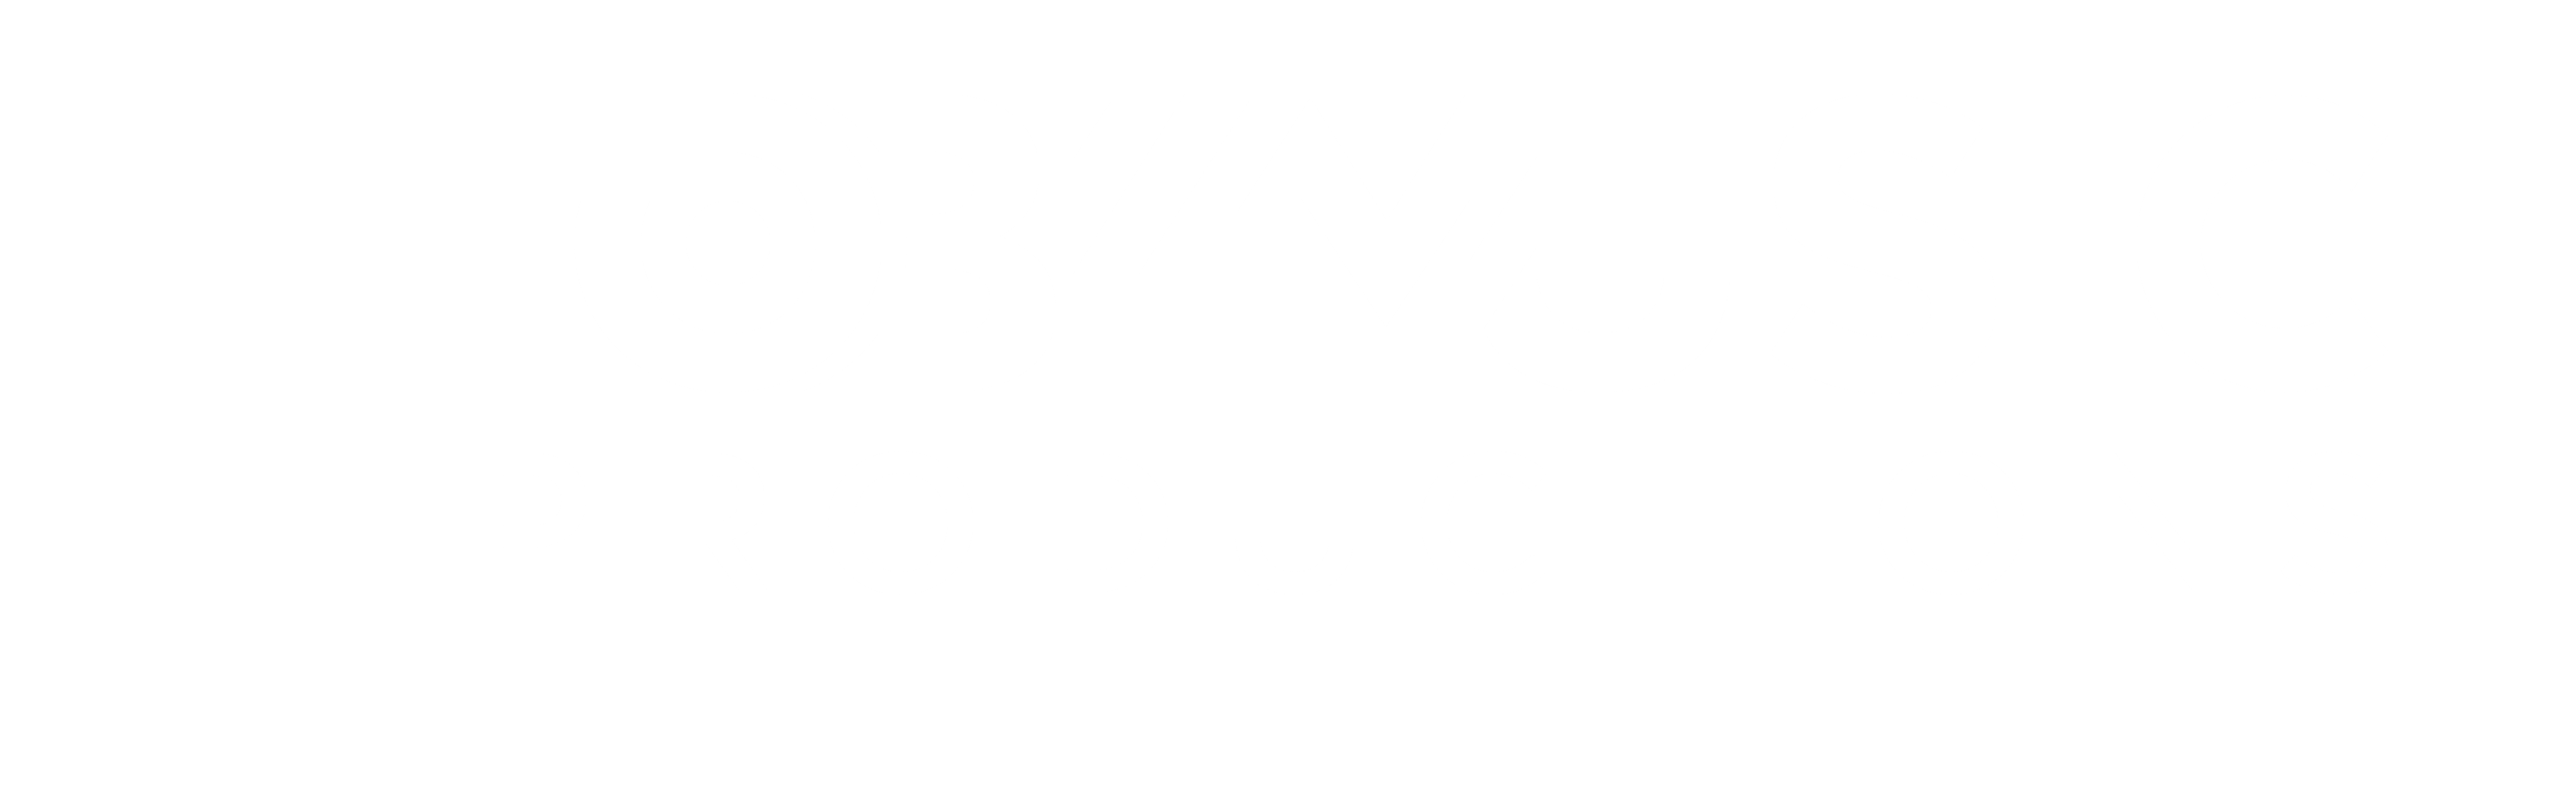 Tobymusic Productions